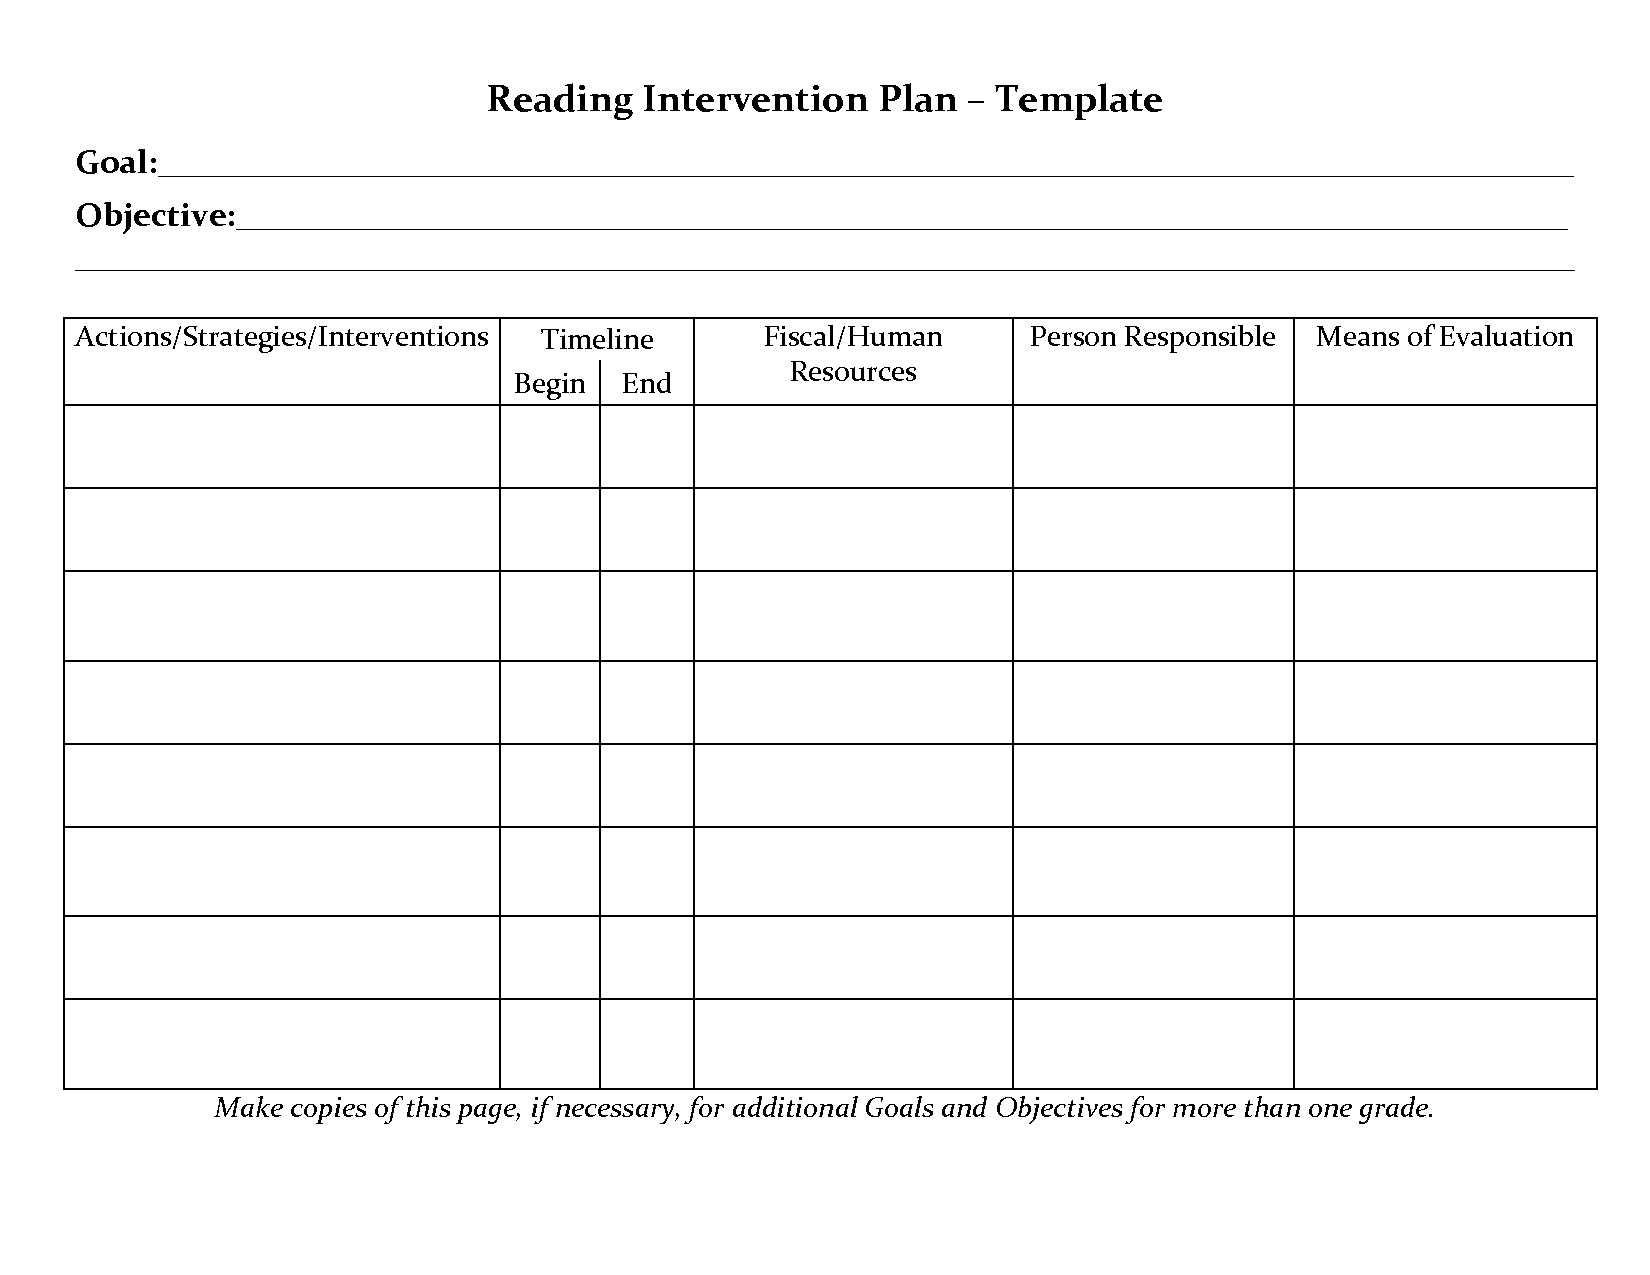 Close Reading Worksheet High School Along with top Result 60 Luxury Close Reading Planning Template Image 2017 Hdj5